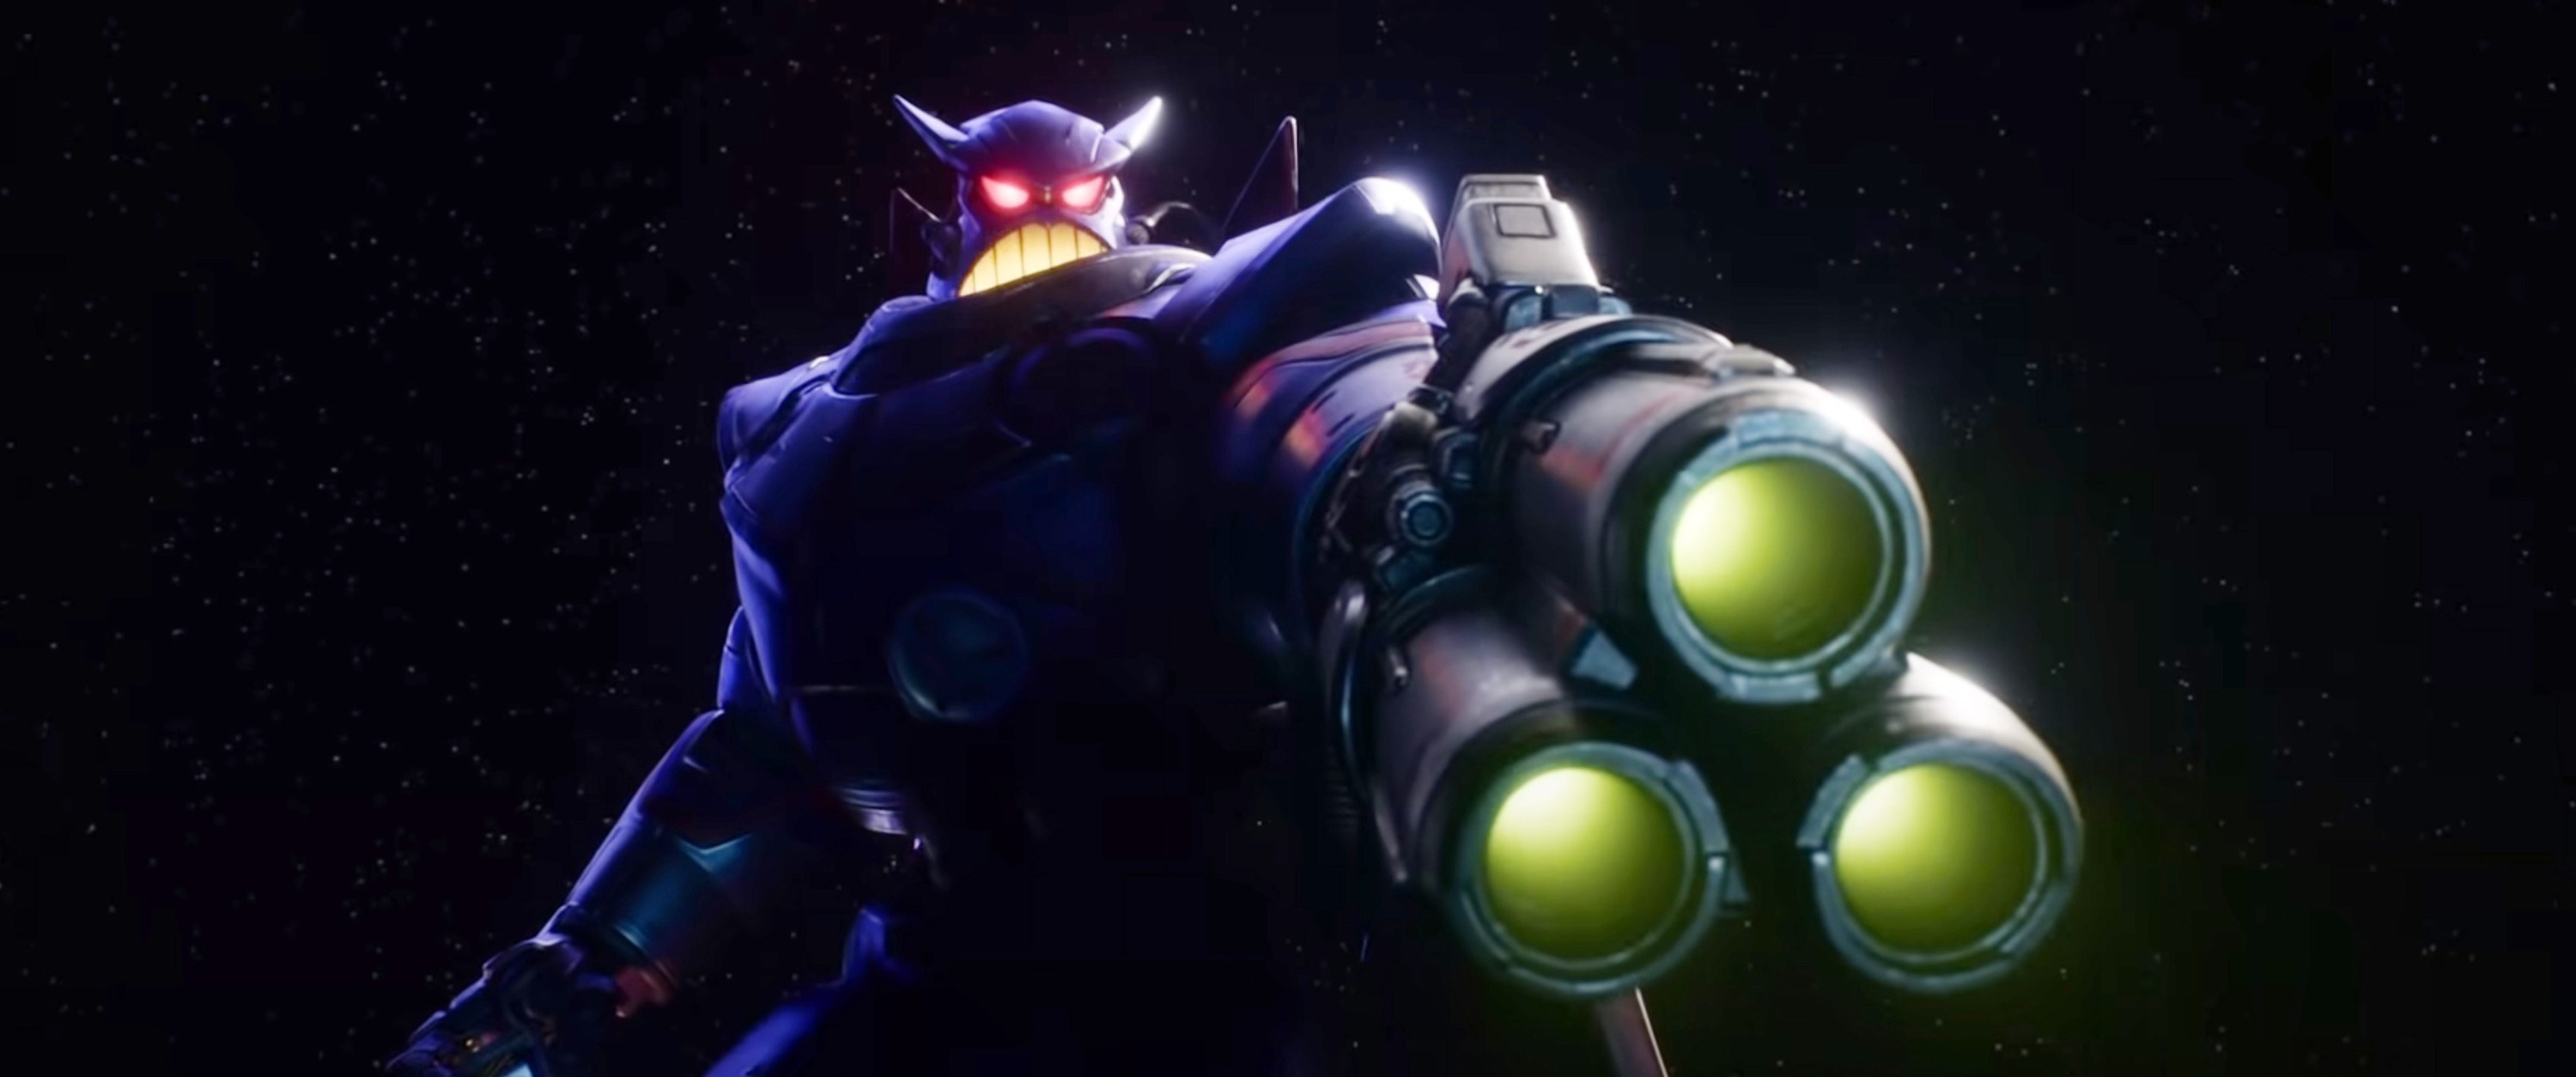 Zurg pointing his weapon arm